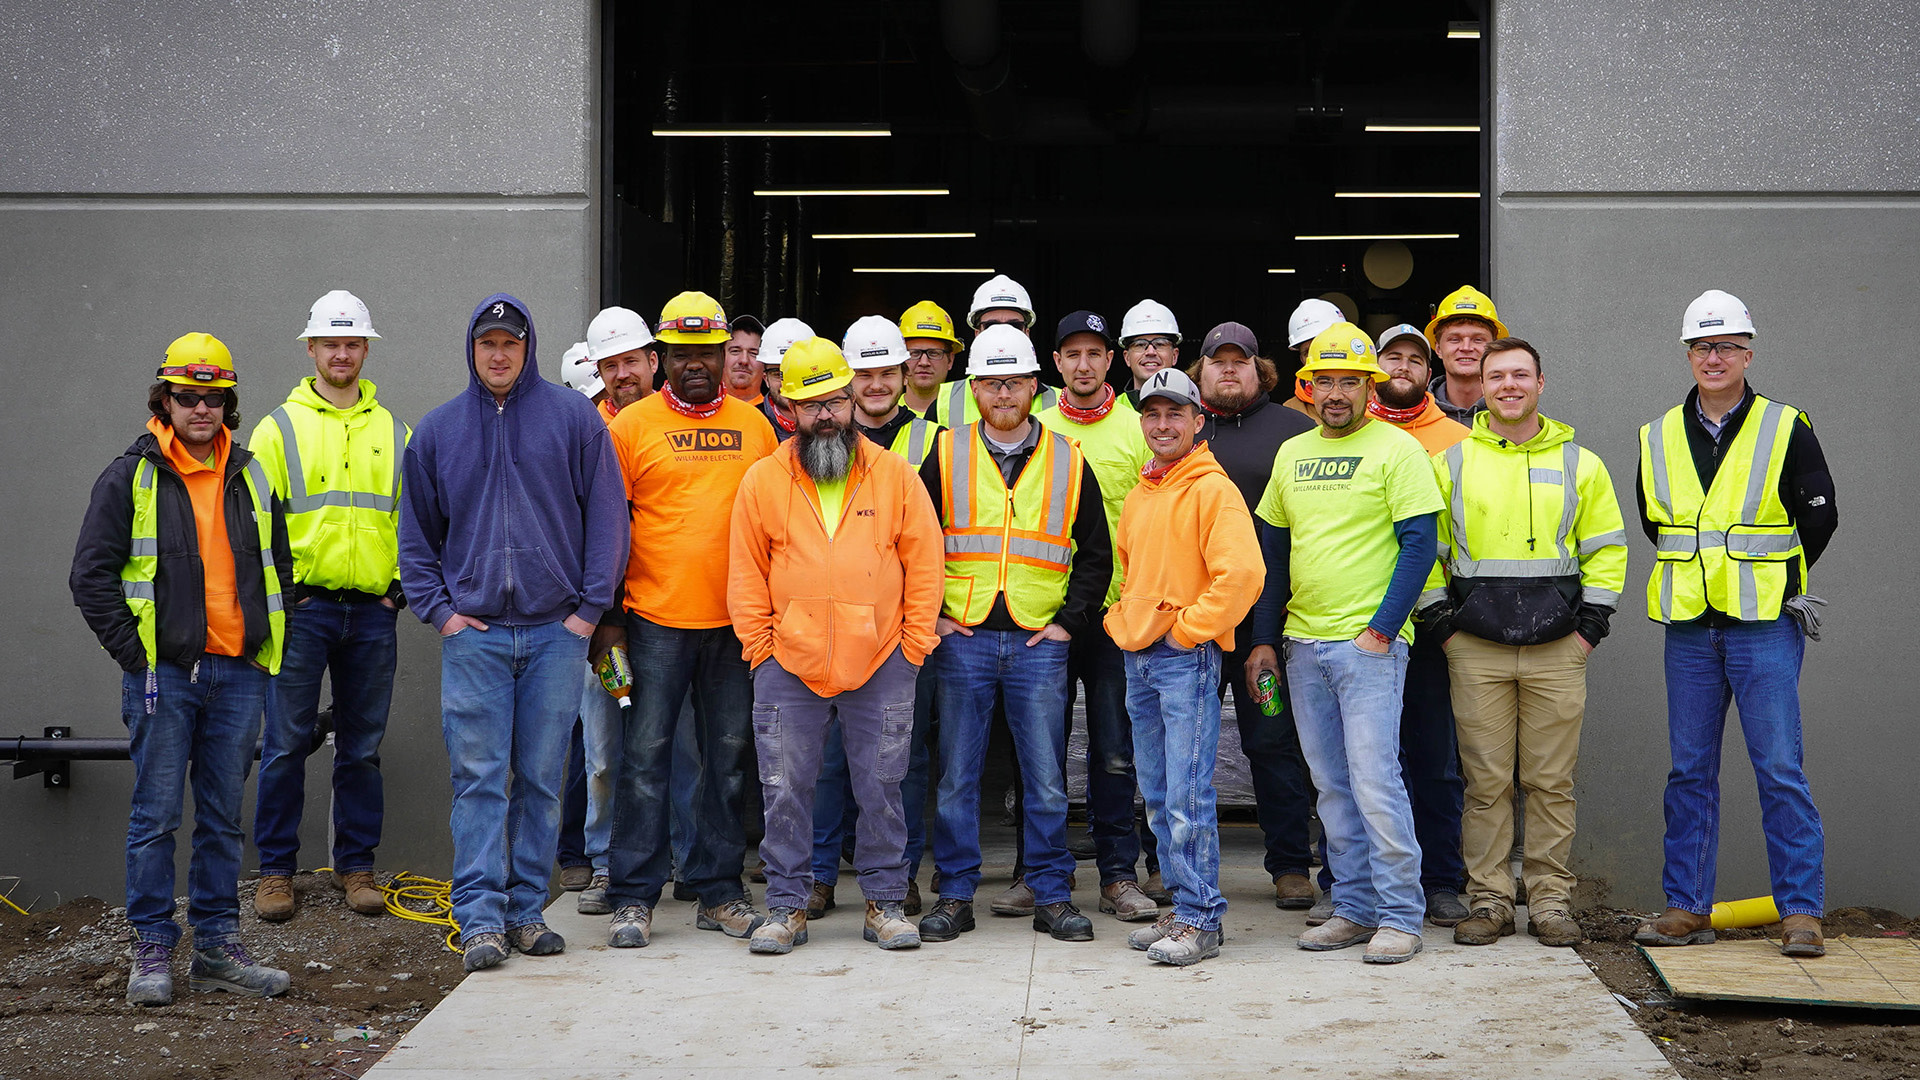 Willmar Electric workers posing for the camera